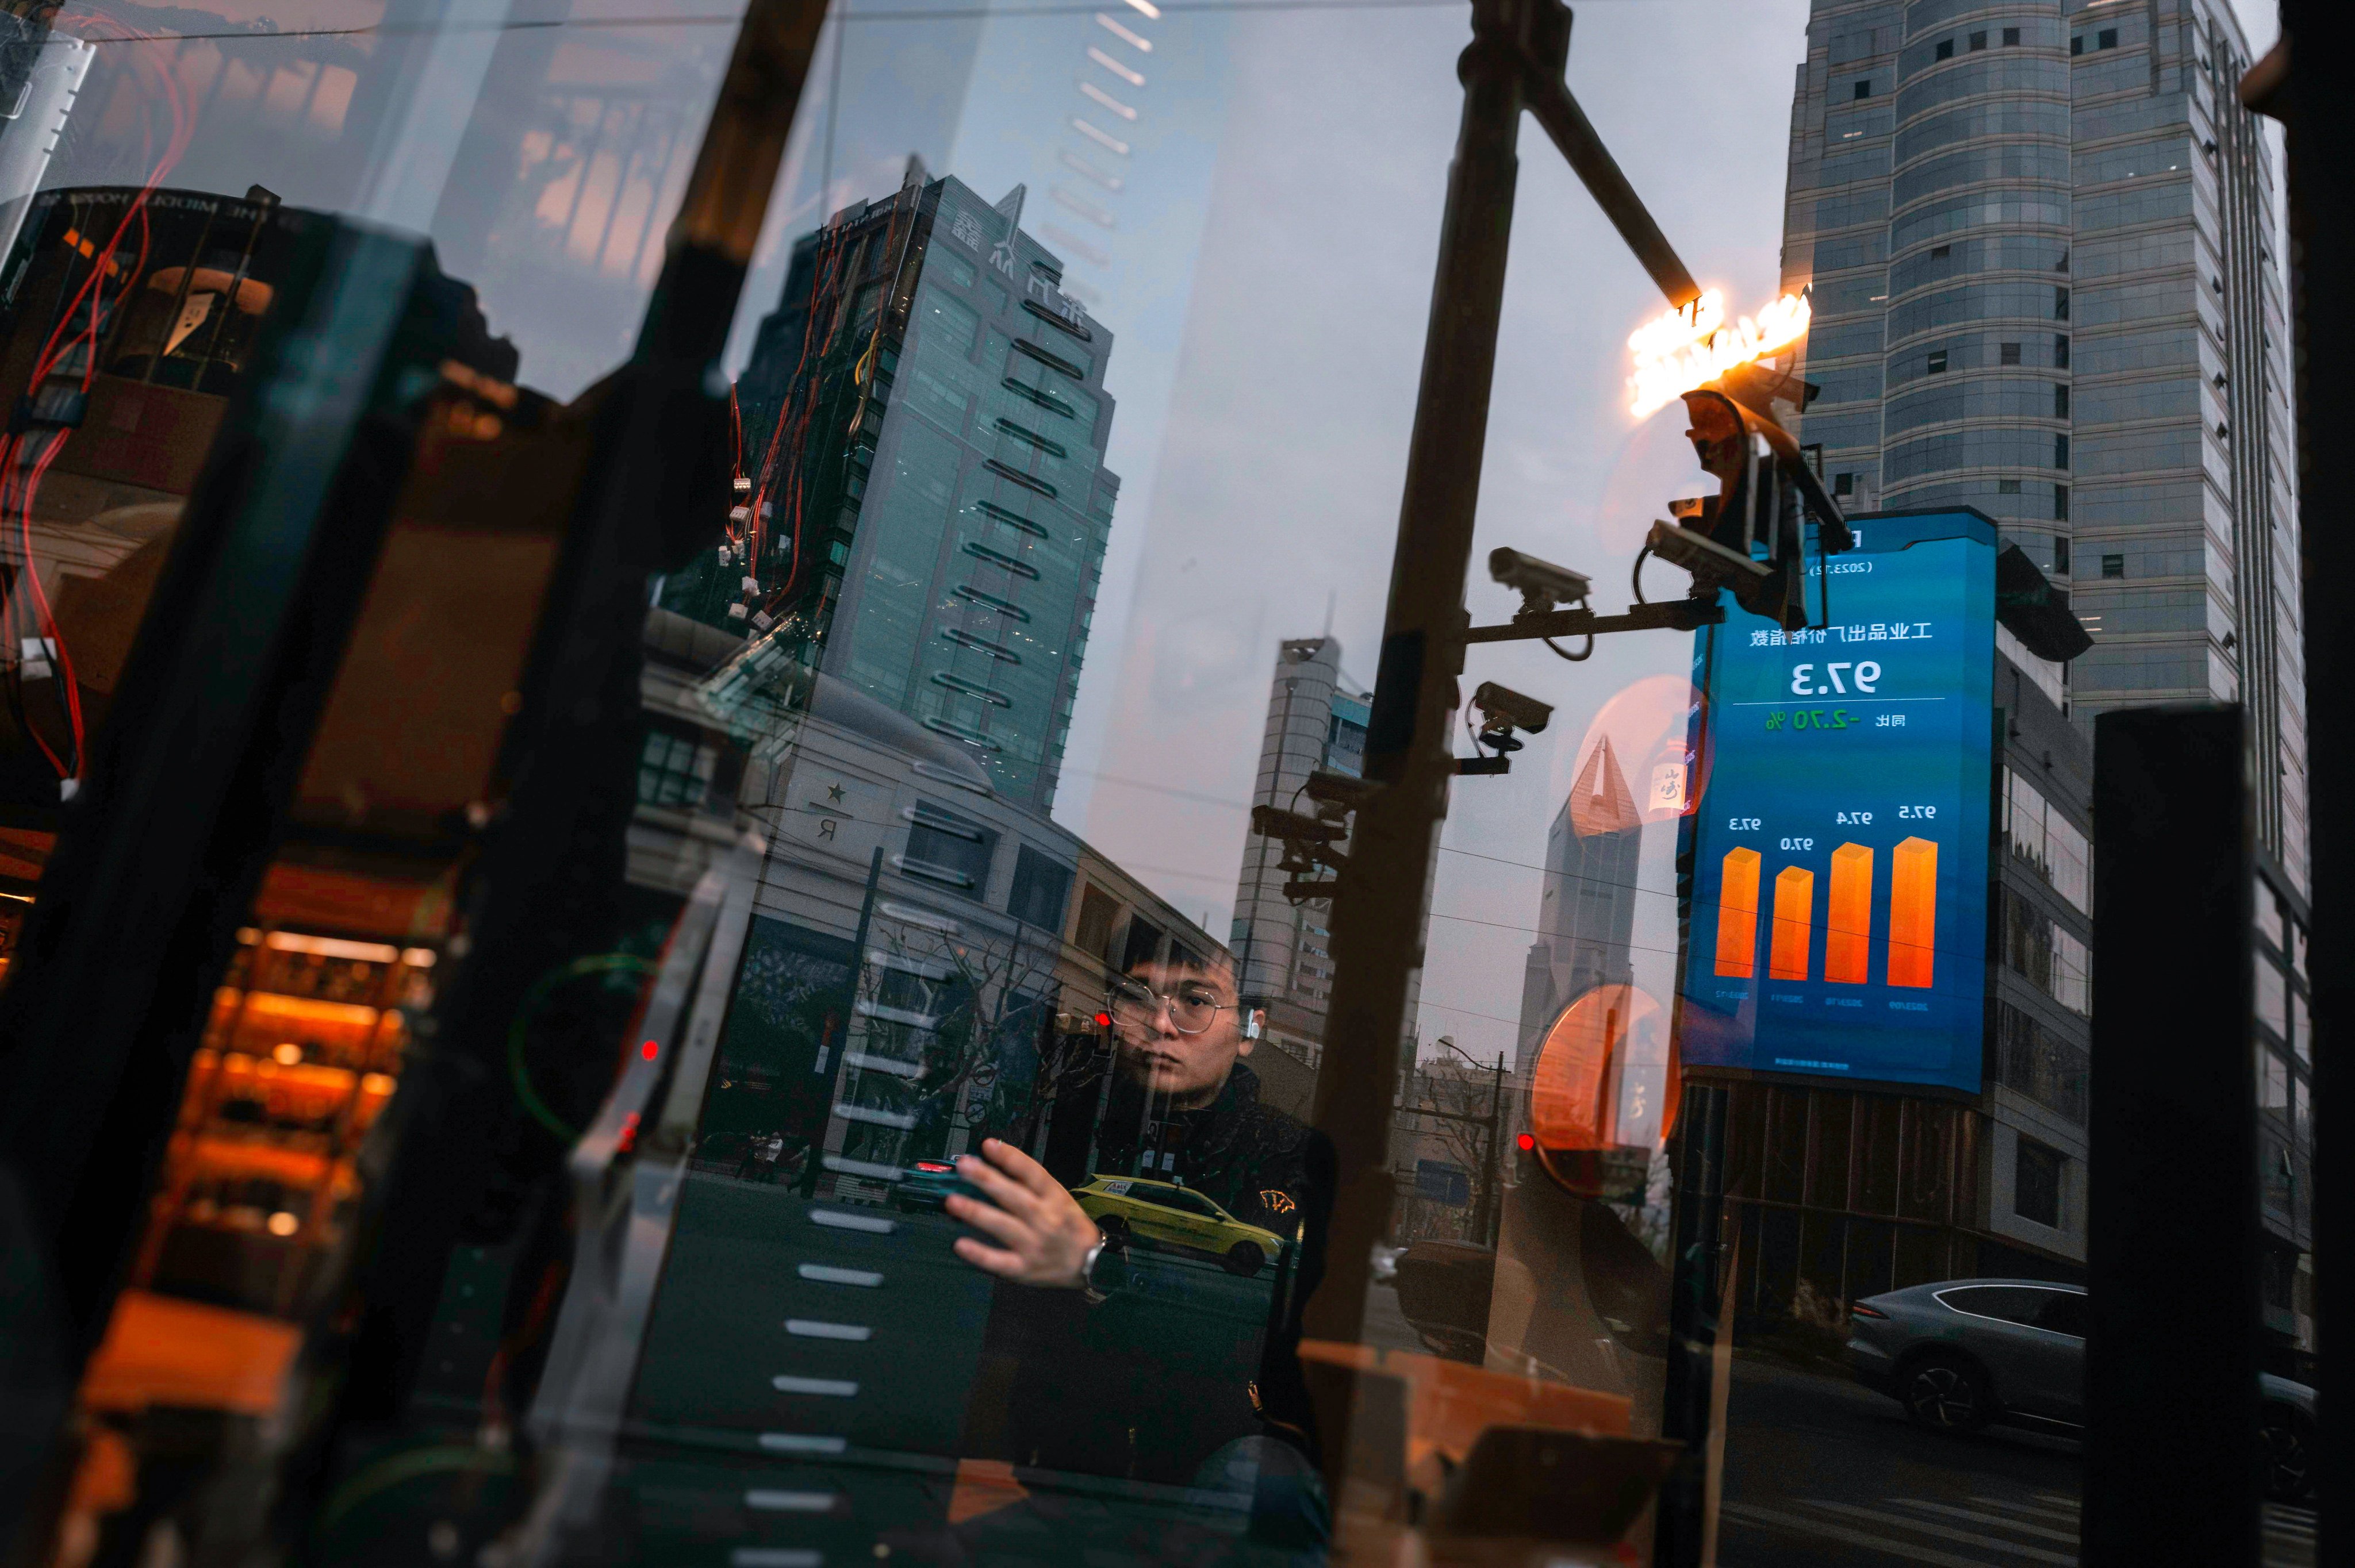 A large screen showing the latest stock exchange and economic data is reflected in a shop window in Shanghai, in this file photo from January. Photo: EPA-EFE